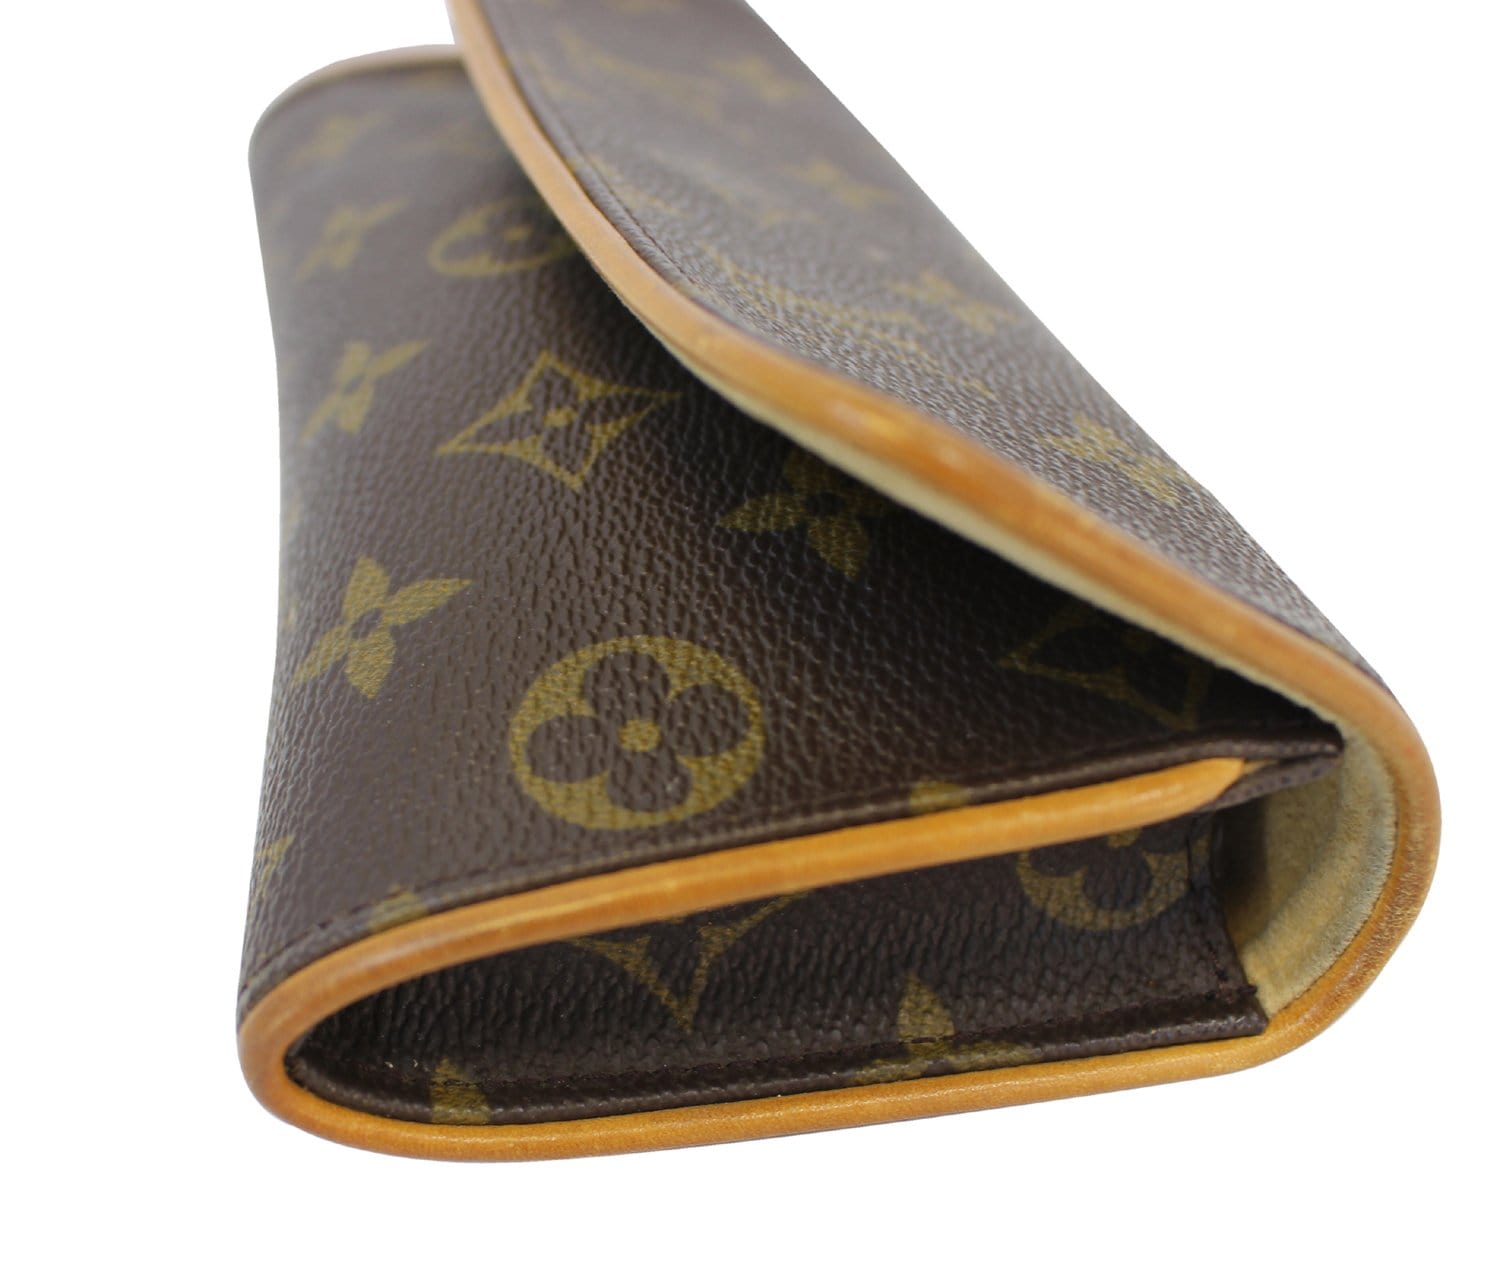 CC VIP Gift Multi Pochette Phone Bag with Tweed Coin Pouch – Capsule Gems